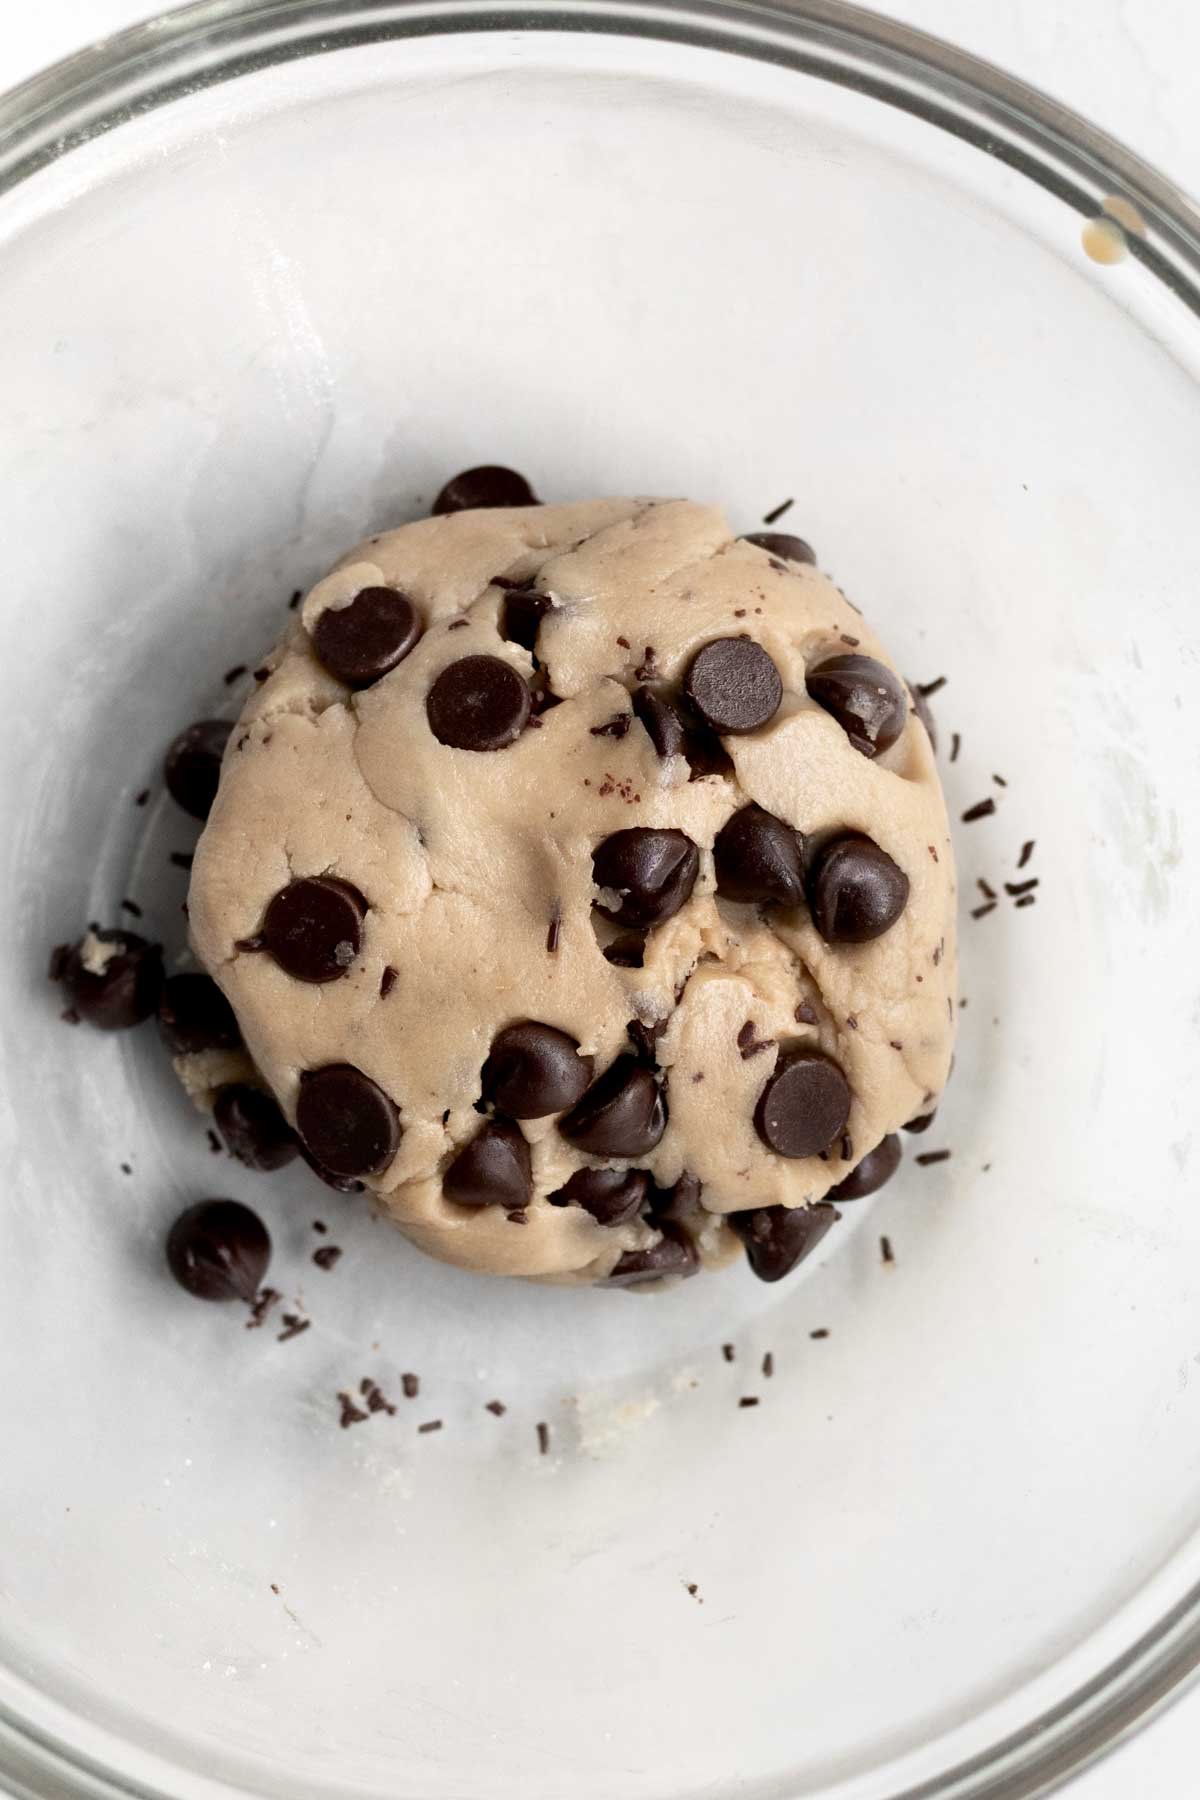 Mixing in chocolate chips into the cookie dough batter.